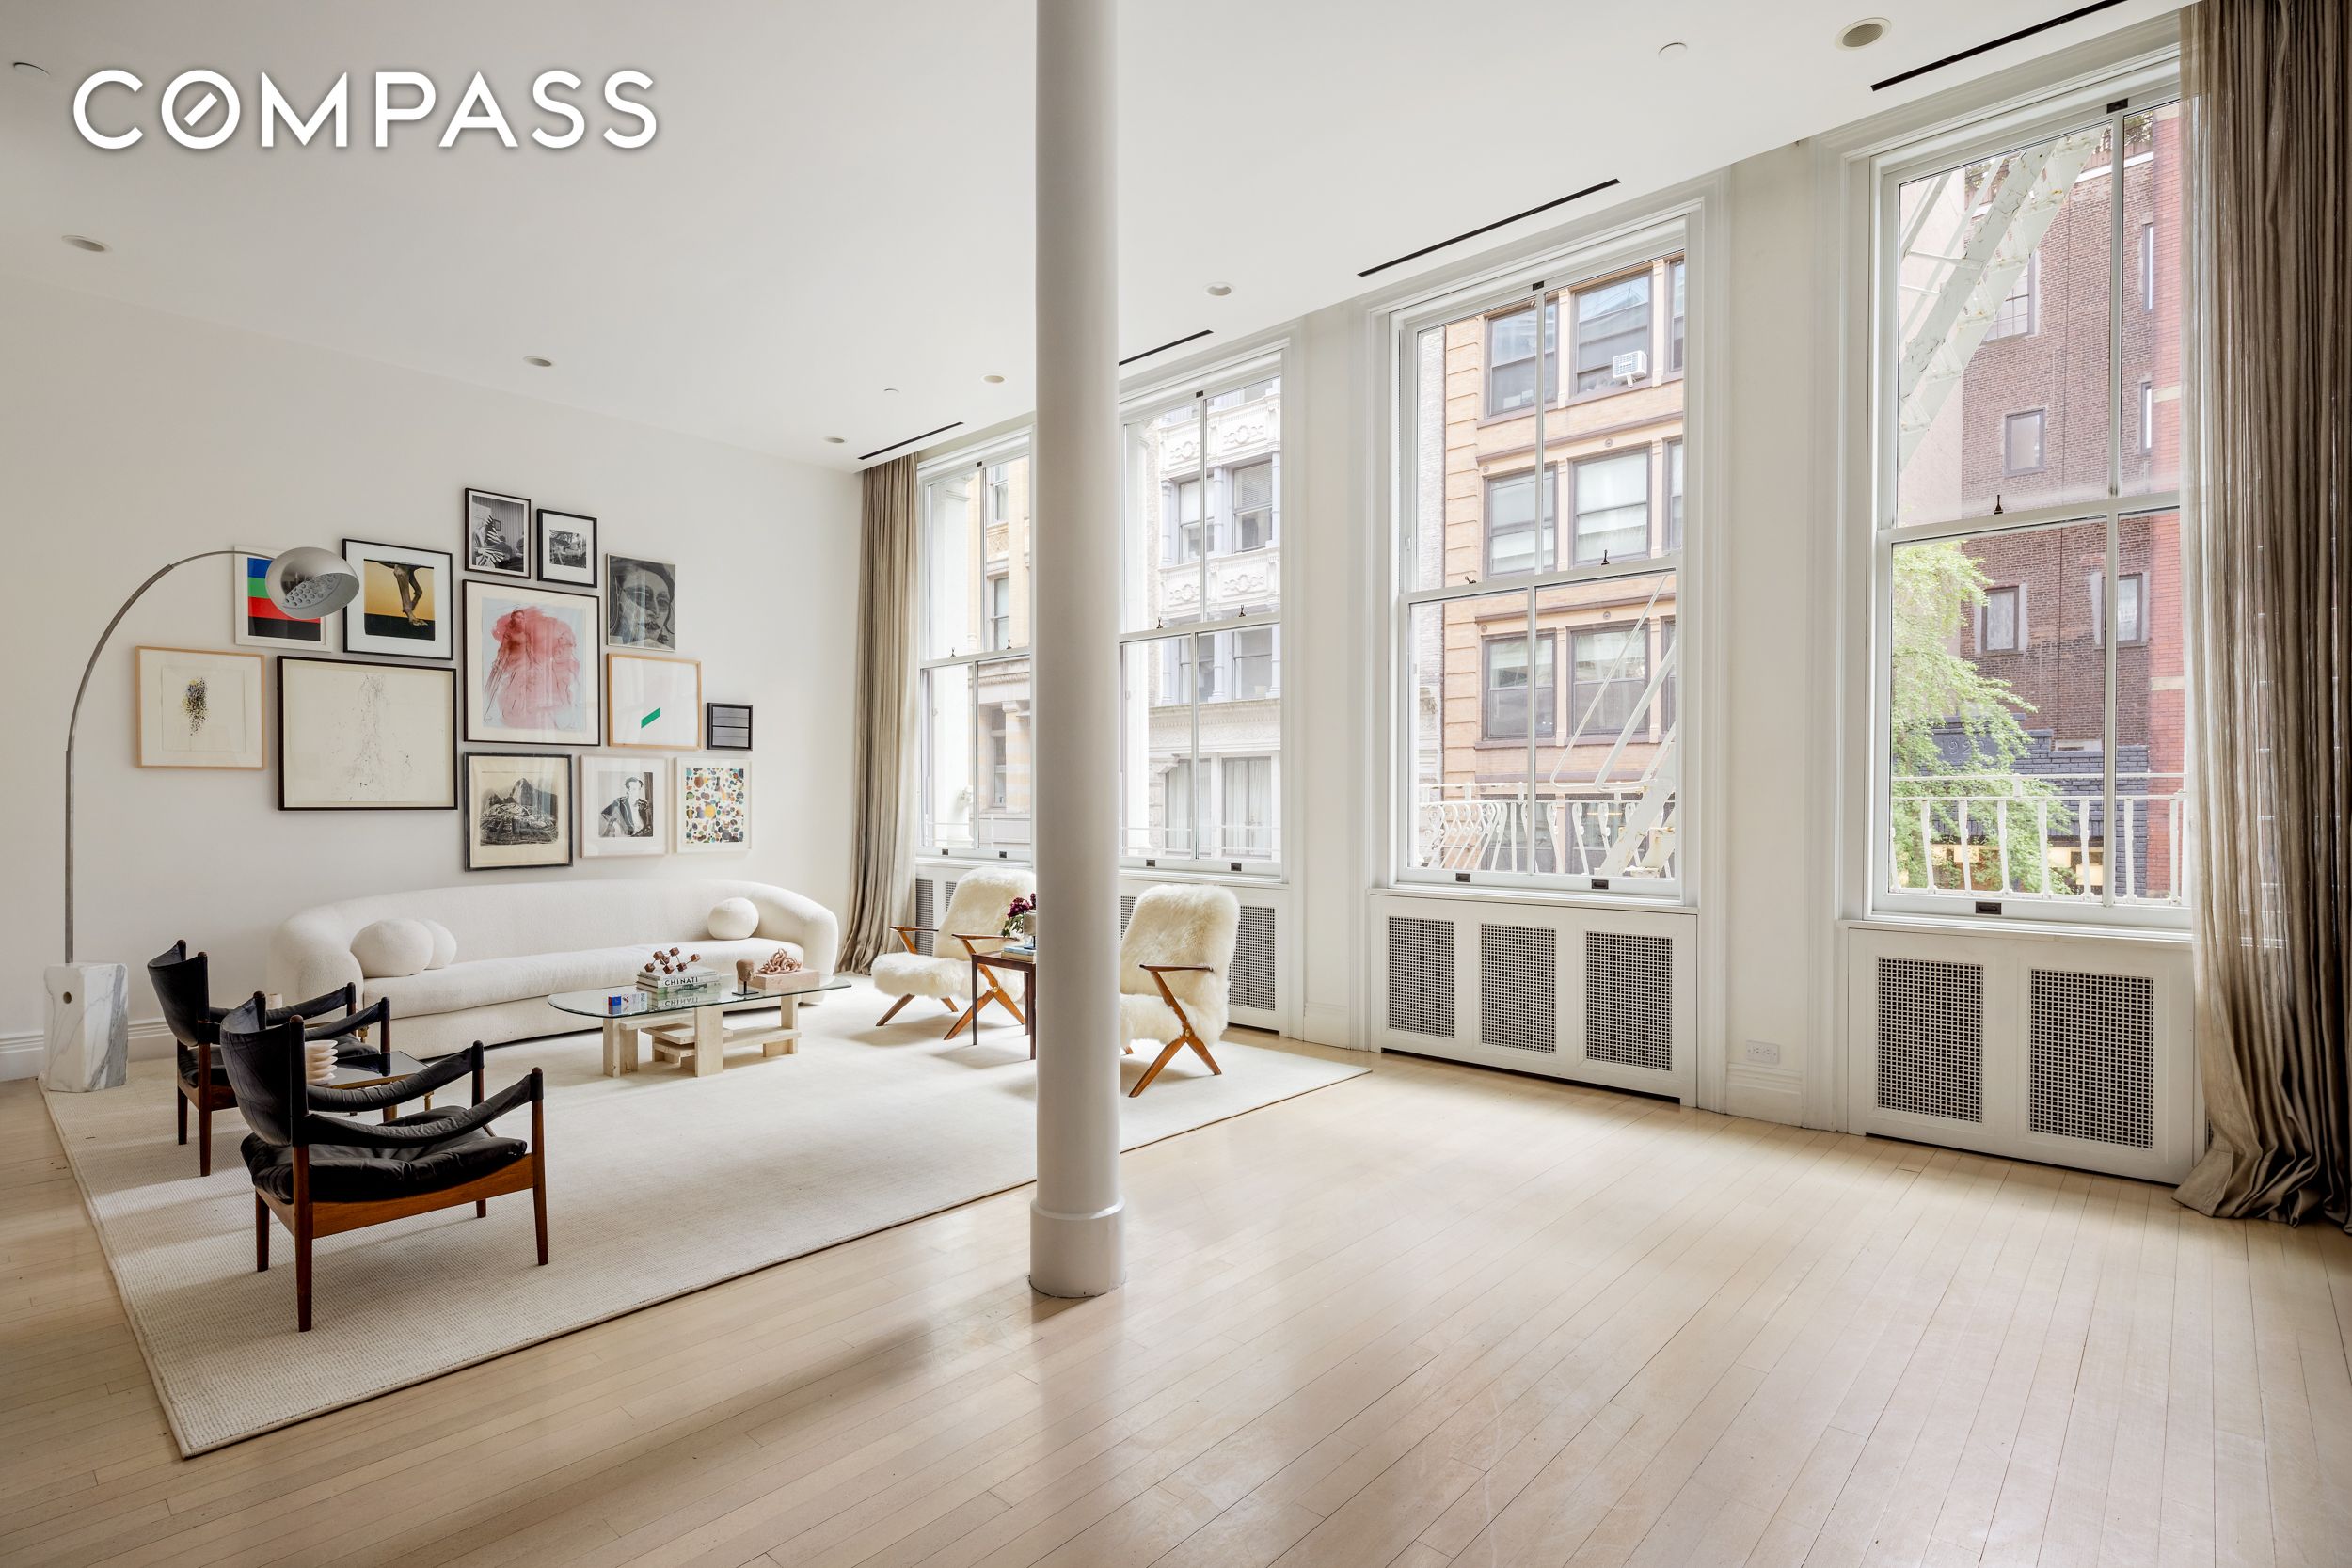 115 Spring Street 2, Soho, Downtown, NYC - 3 Bedrooms  
2.5 Bathrooms  
5 Rooms - 